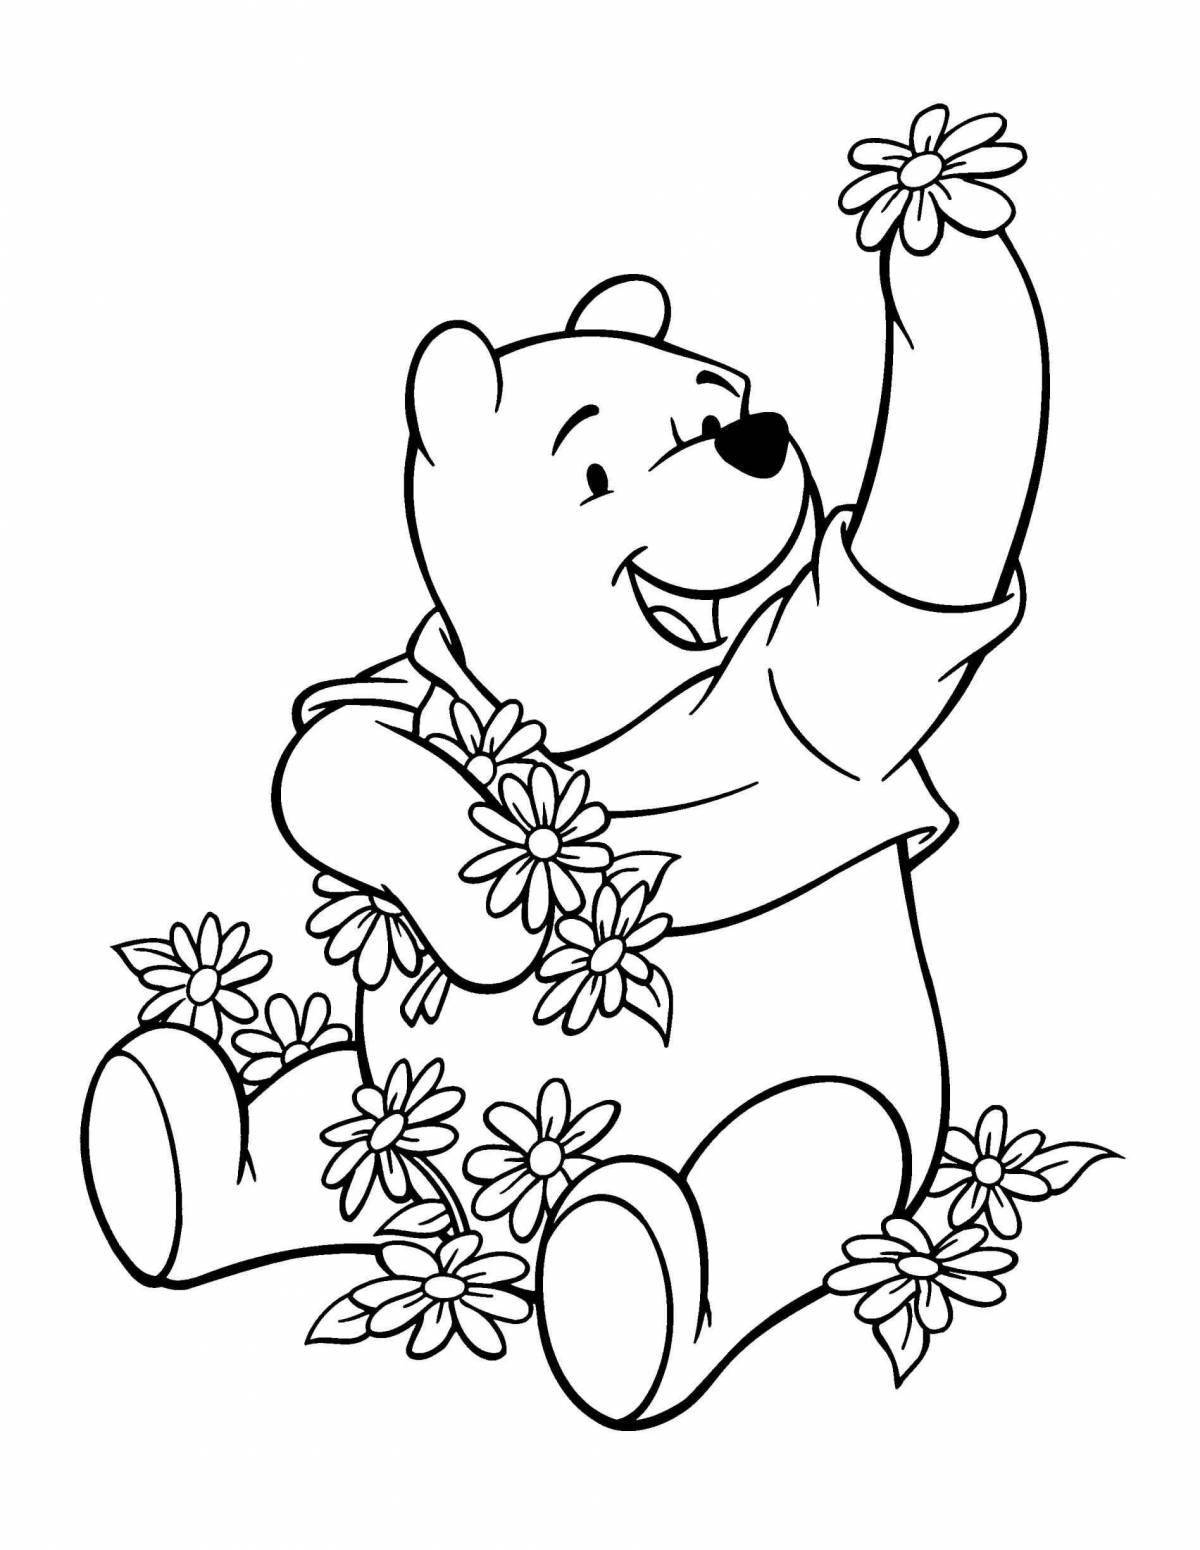 Winnie's adorable coloring page